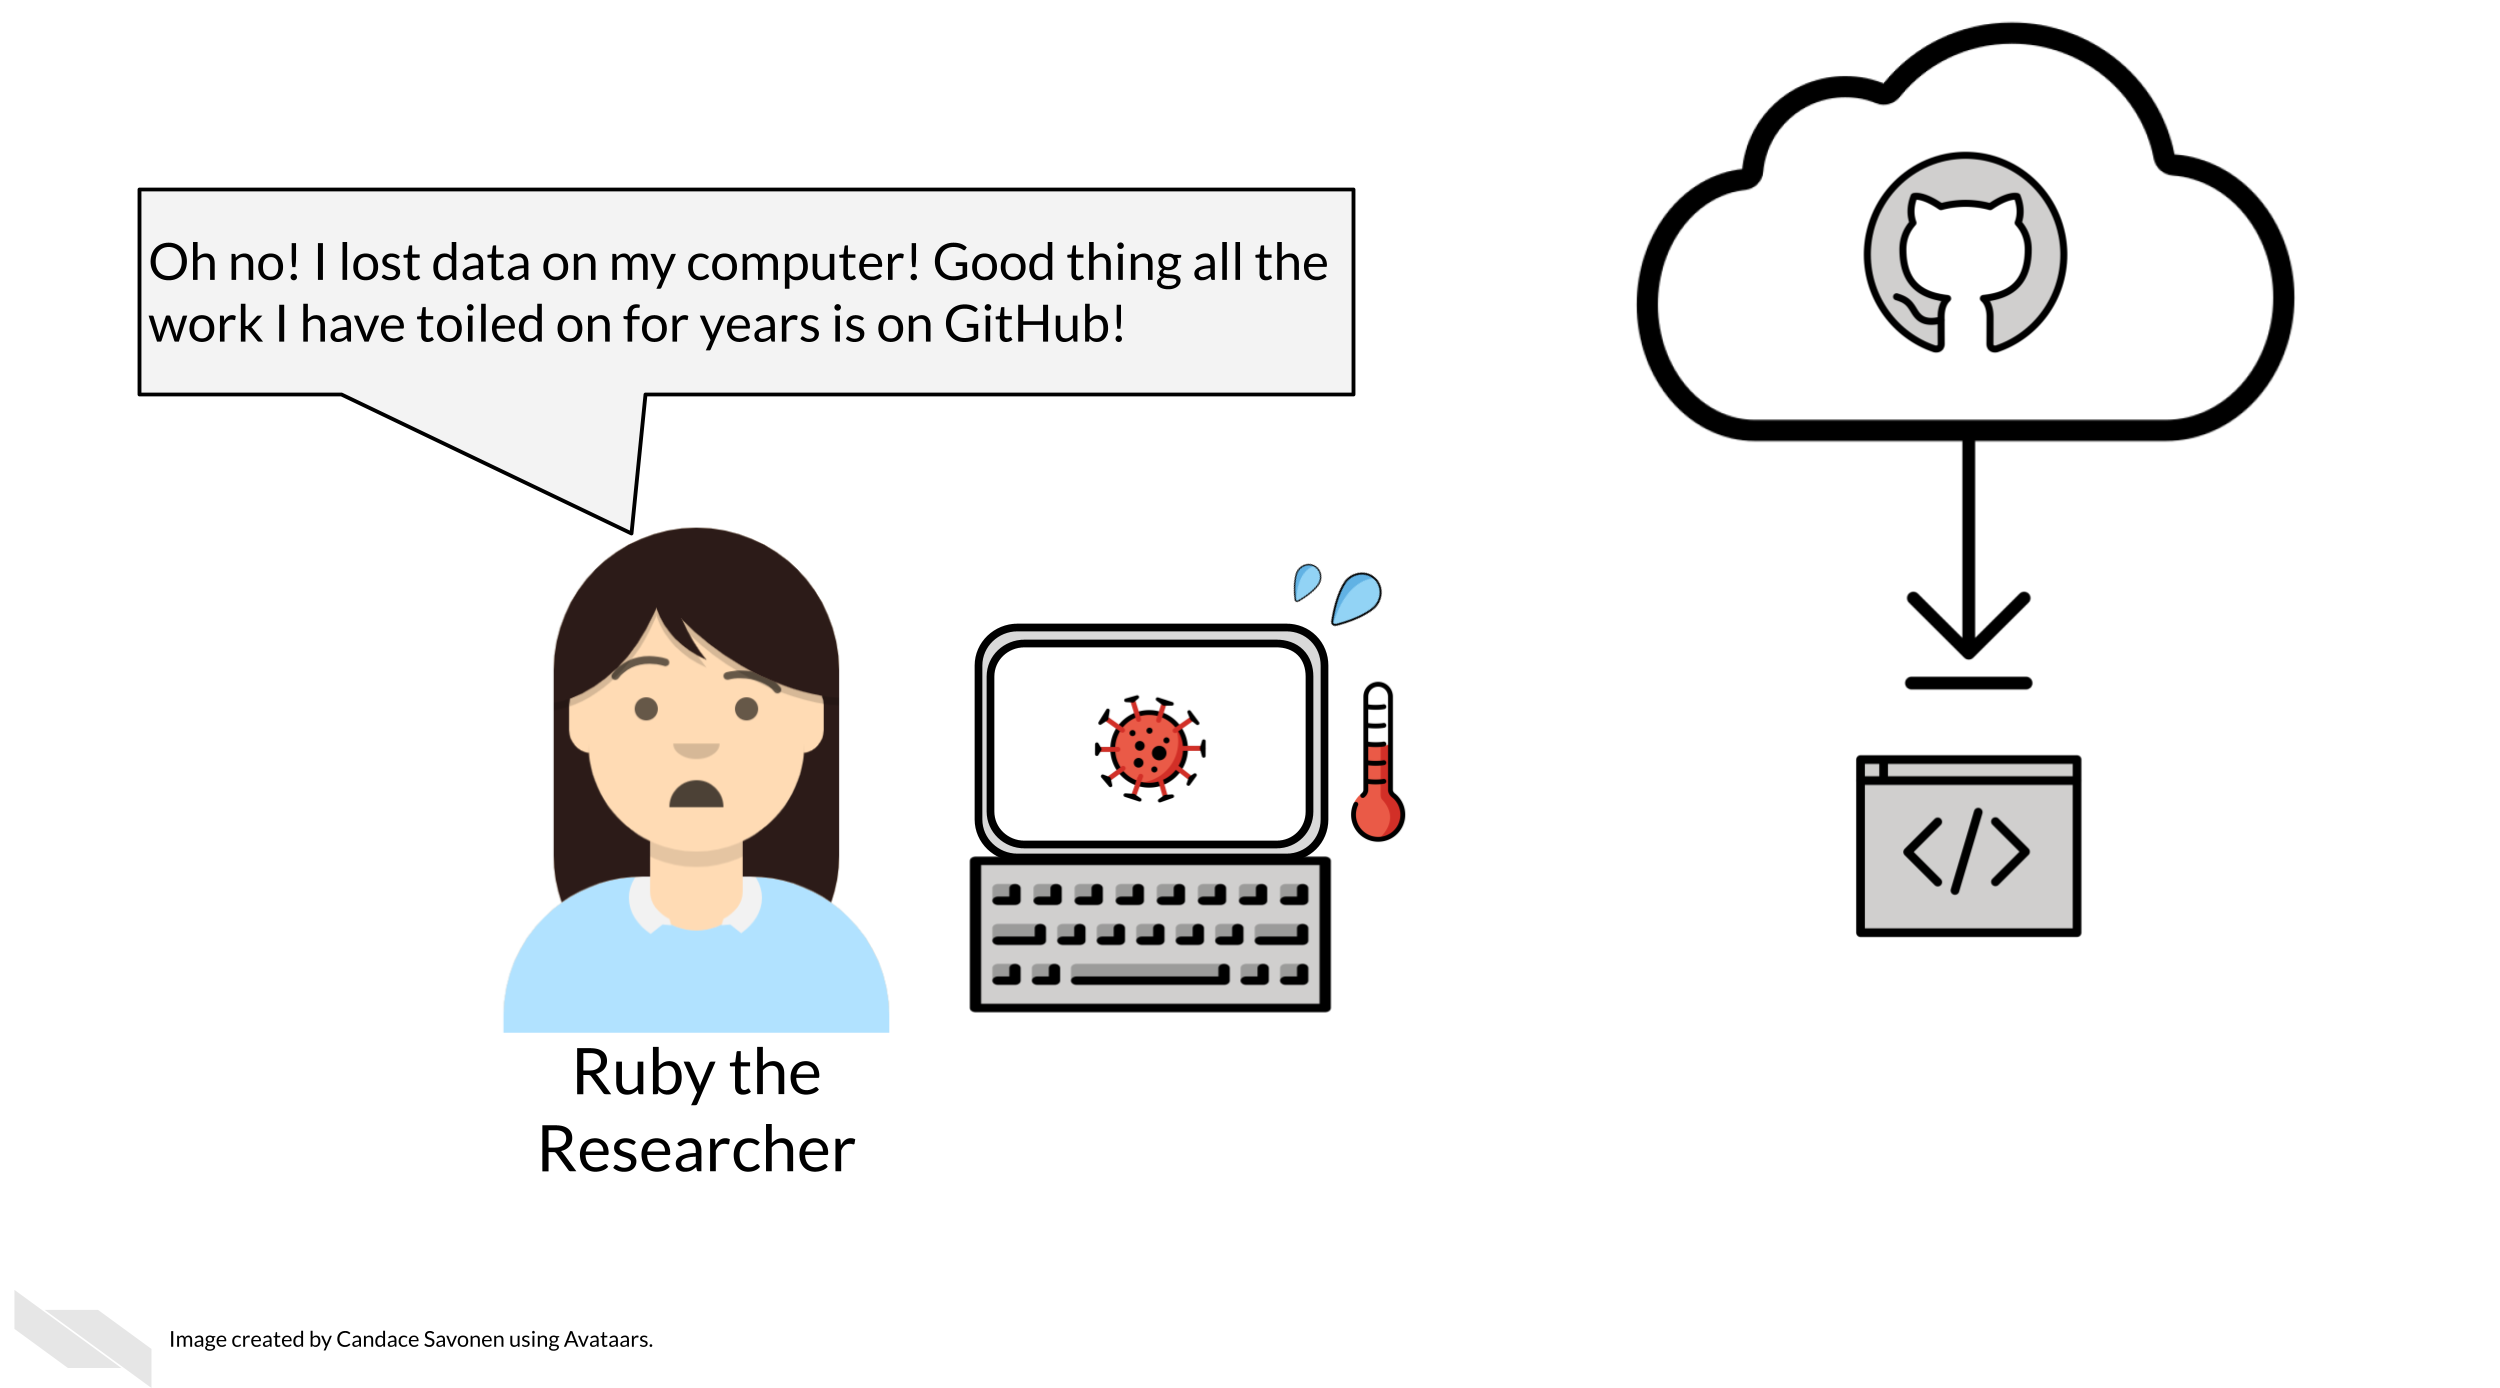 Ruby’s computer shows a virus and has a temperature. Ruby says ‘Oh no! I lost data on my computer! Good thing all the work I have toiled on for years is on GitHub!’ The GitHub cat is in a cloud with a download sign with Ruby’s code.